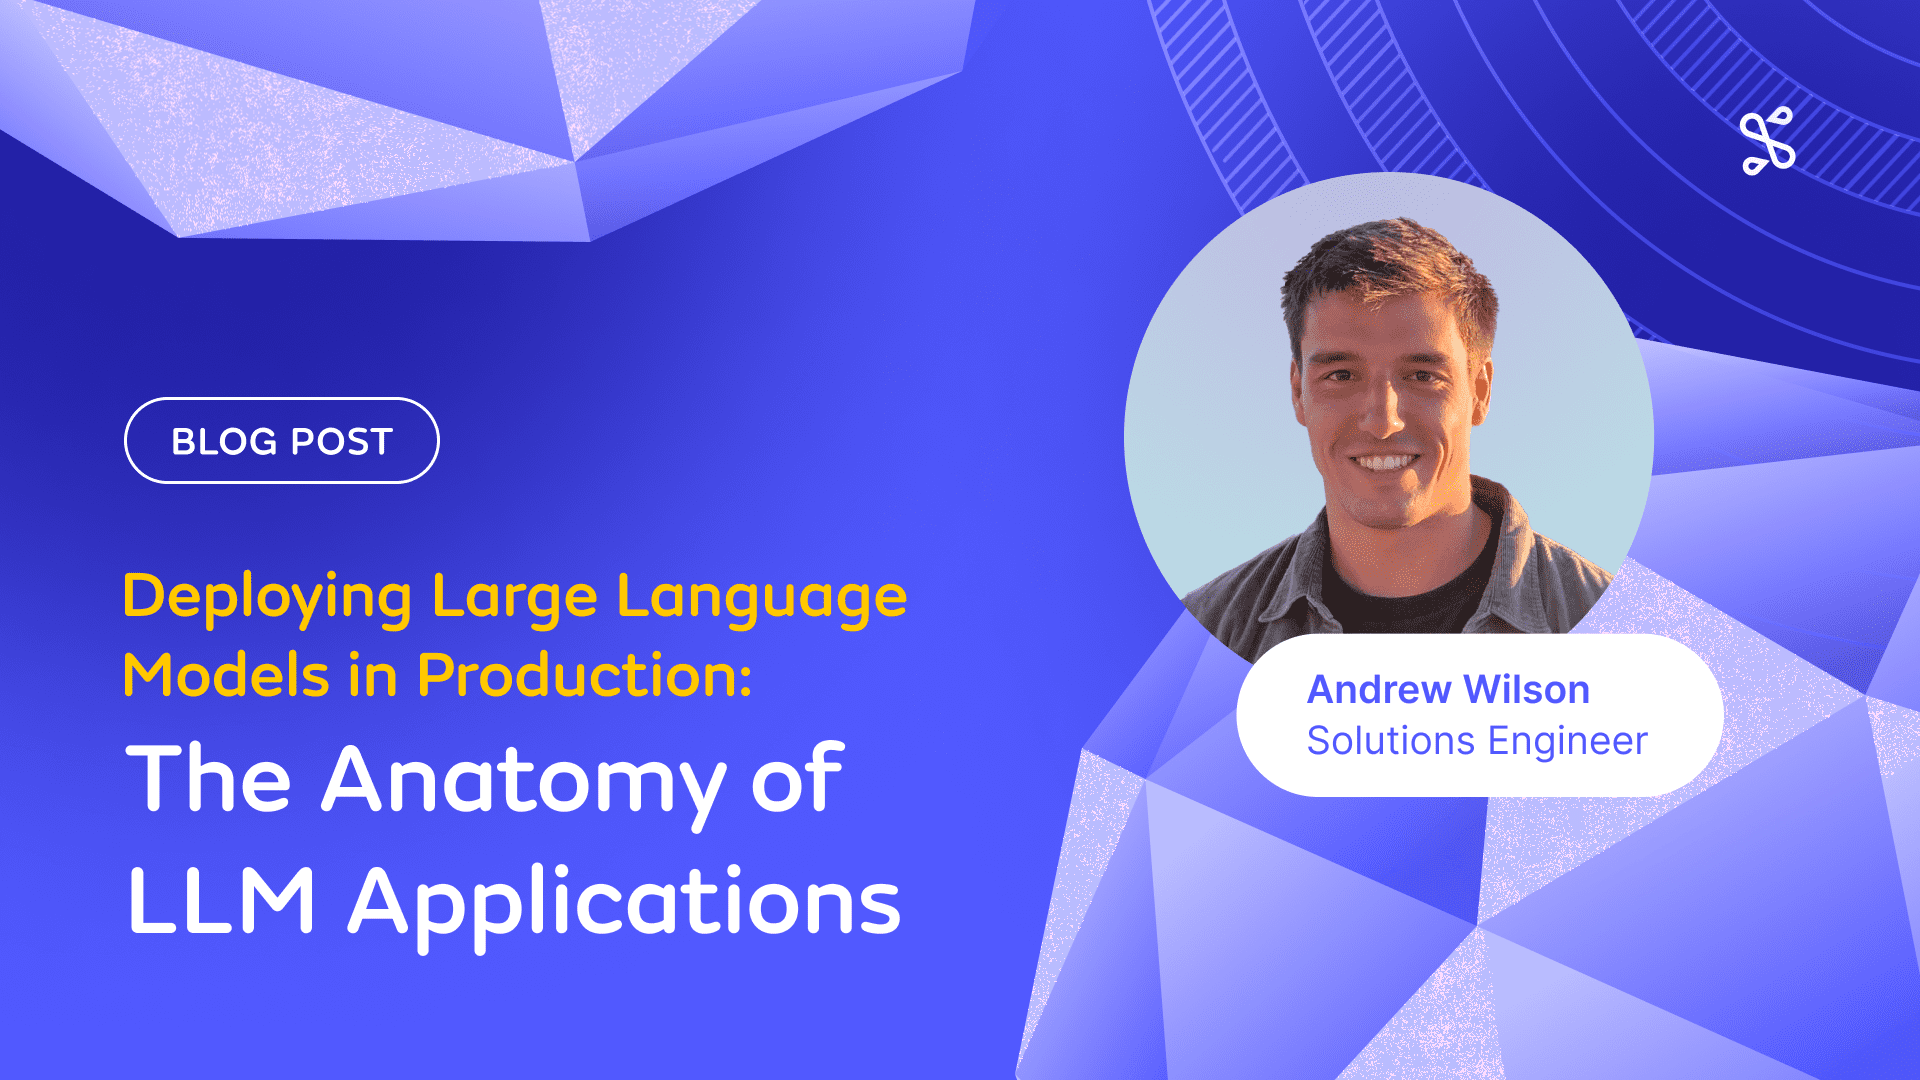 Deploying Large Language Models in Production: The Anatomy of LLM Applications